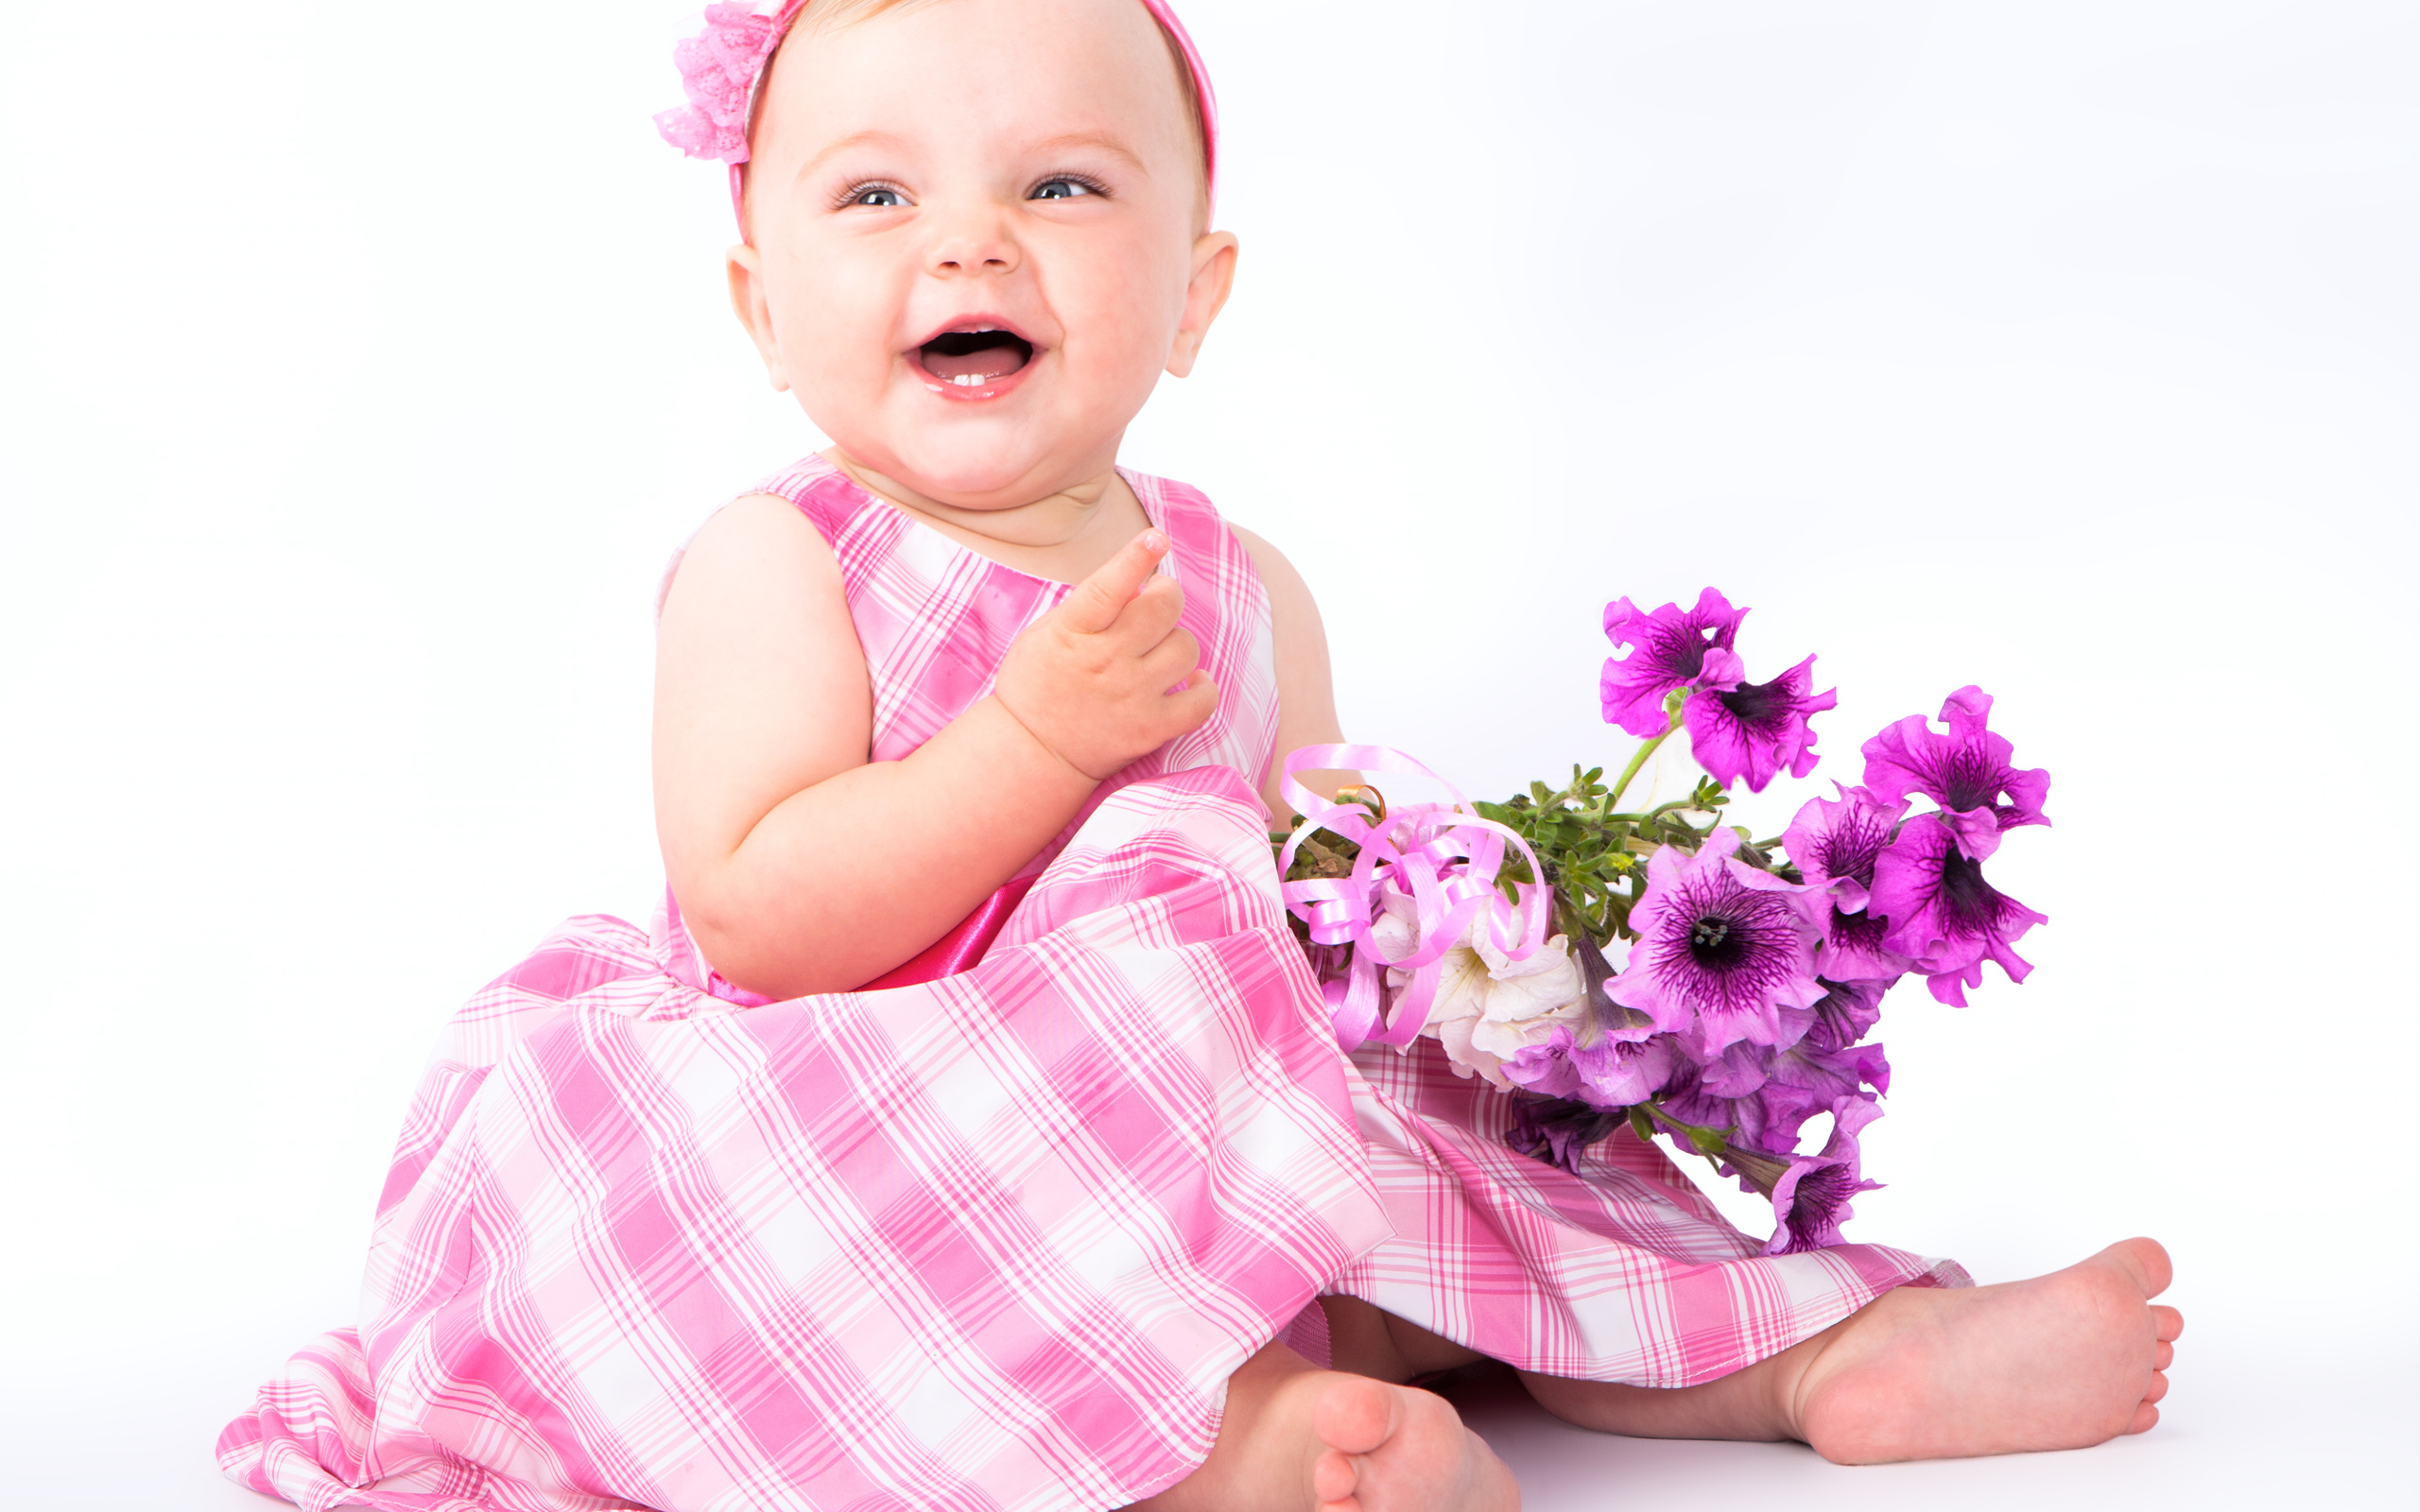 Little smiling girl with a bouquet of petunias on a white background